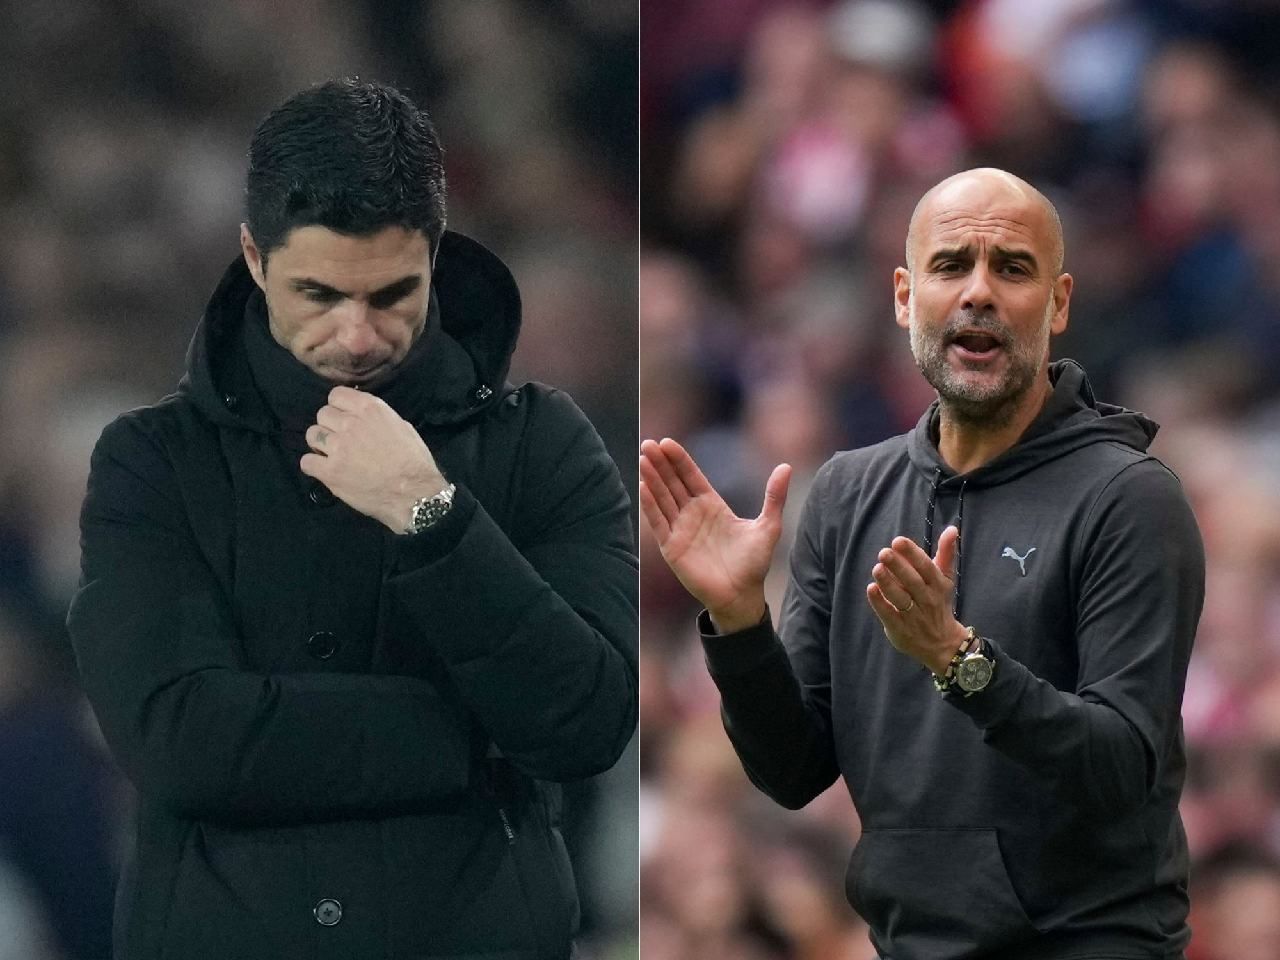 City boss Guardiola fearful of Arsenal backlash as EPL 1-2 in potential title showdown